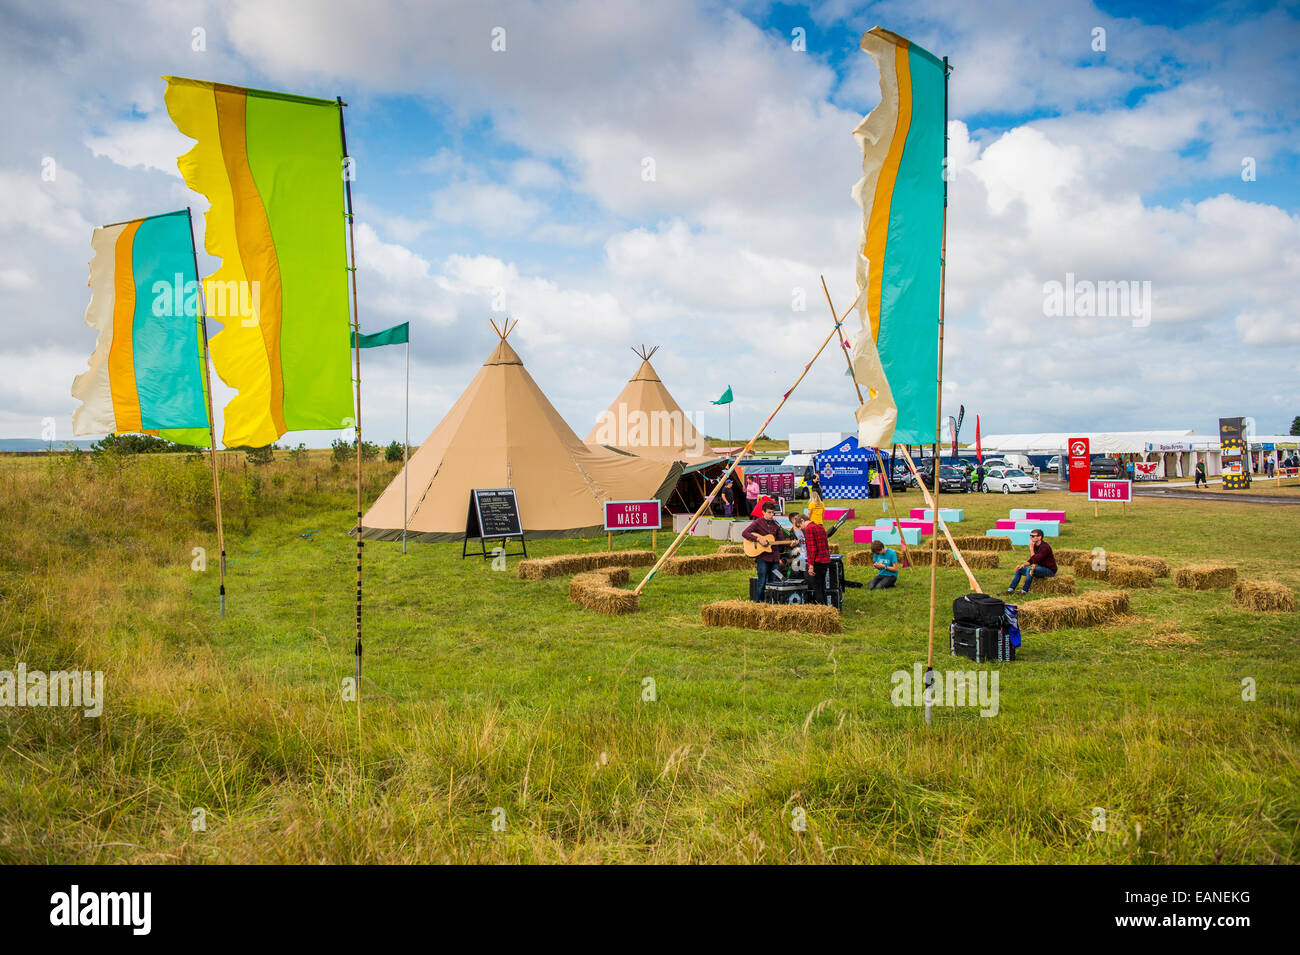 Caffi Maes B - The youth and live music area at the National Eisteddfod of Wales, Llanelli, August 2014 Stock Photo